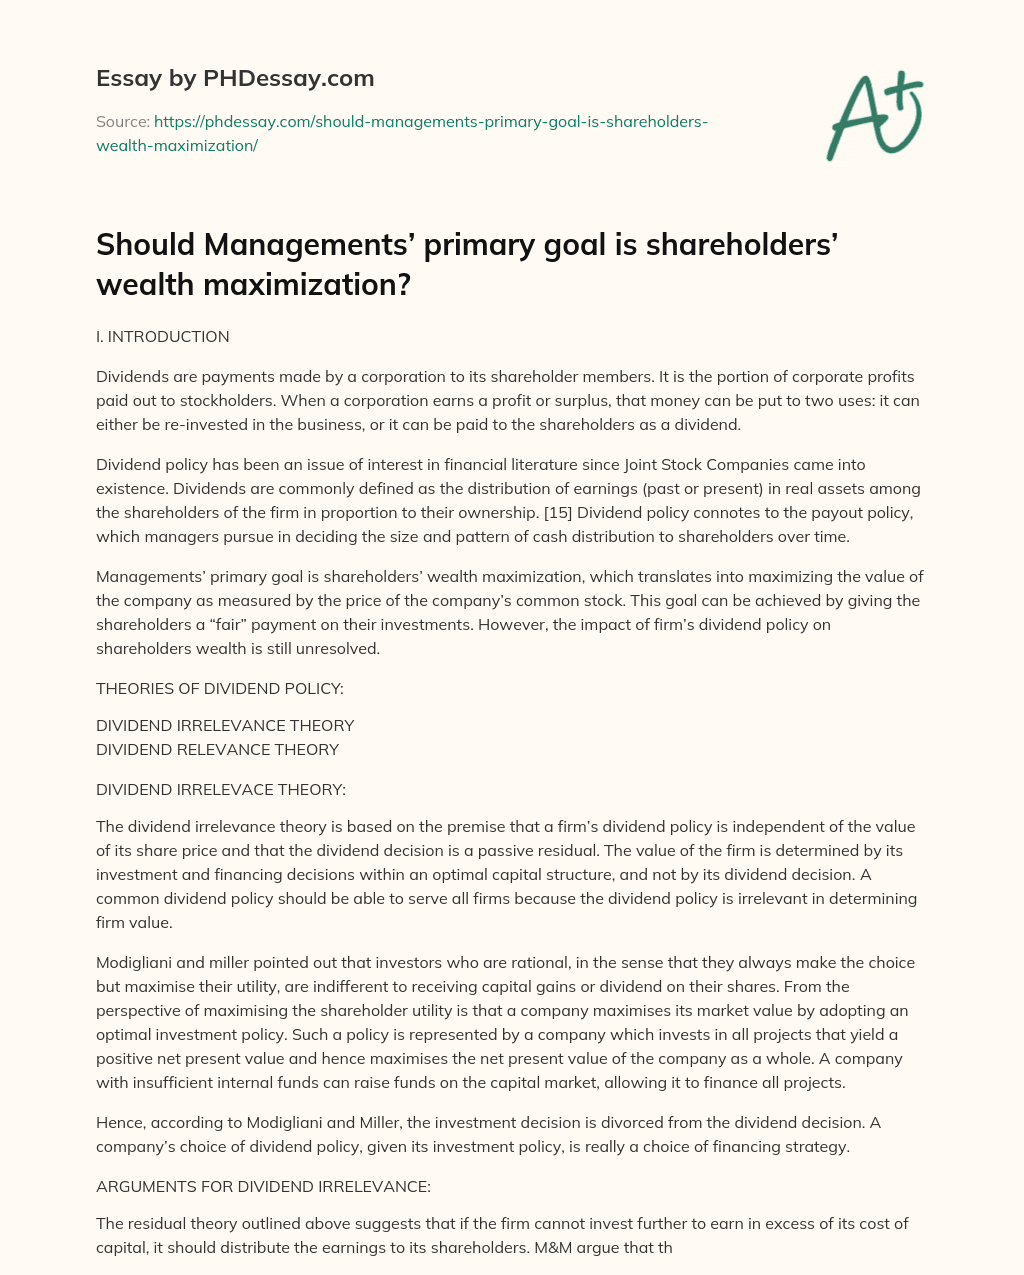 Should Managements’ primary goal is shareholders’ wealth maximization? essay